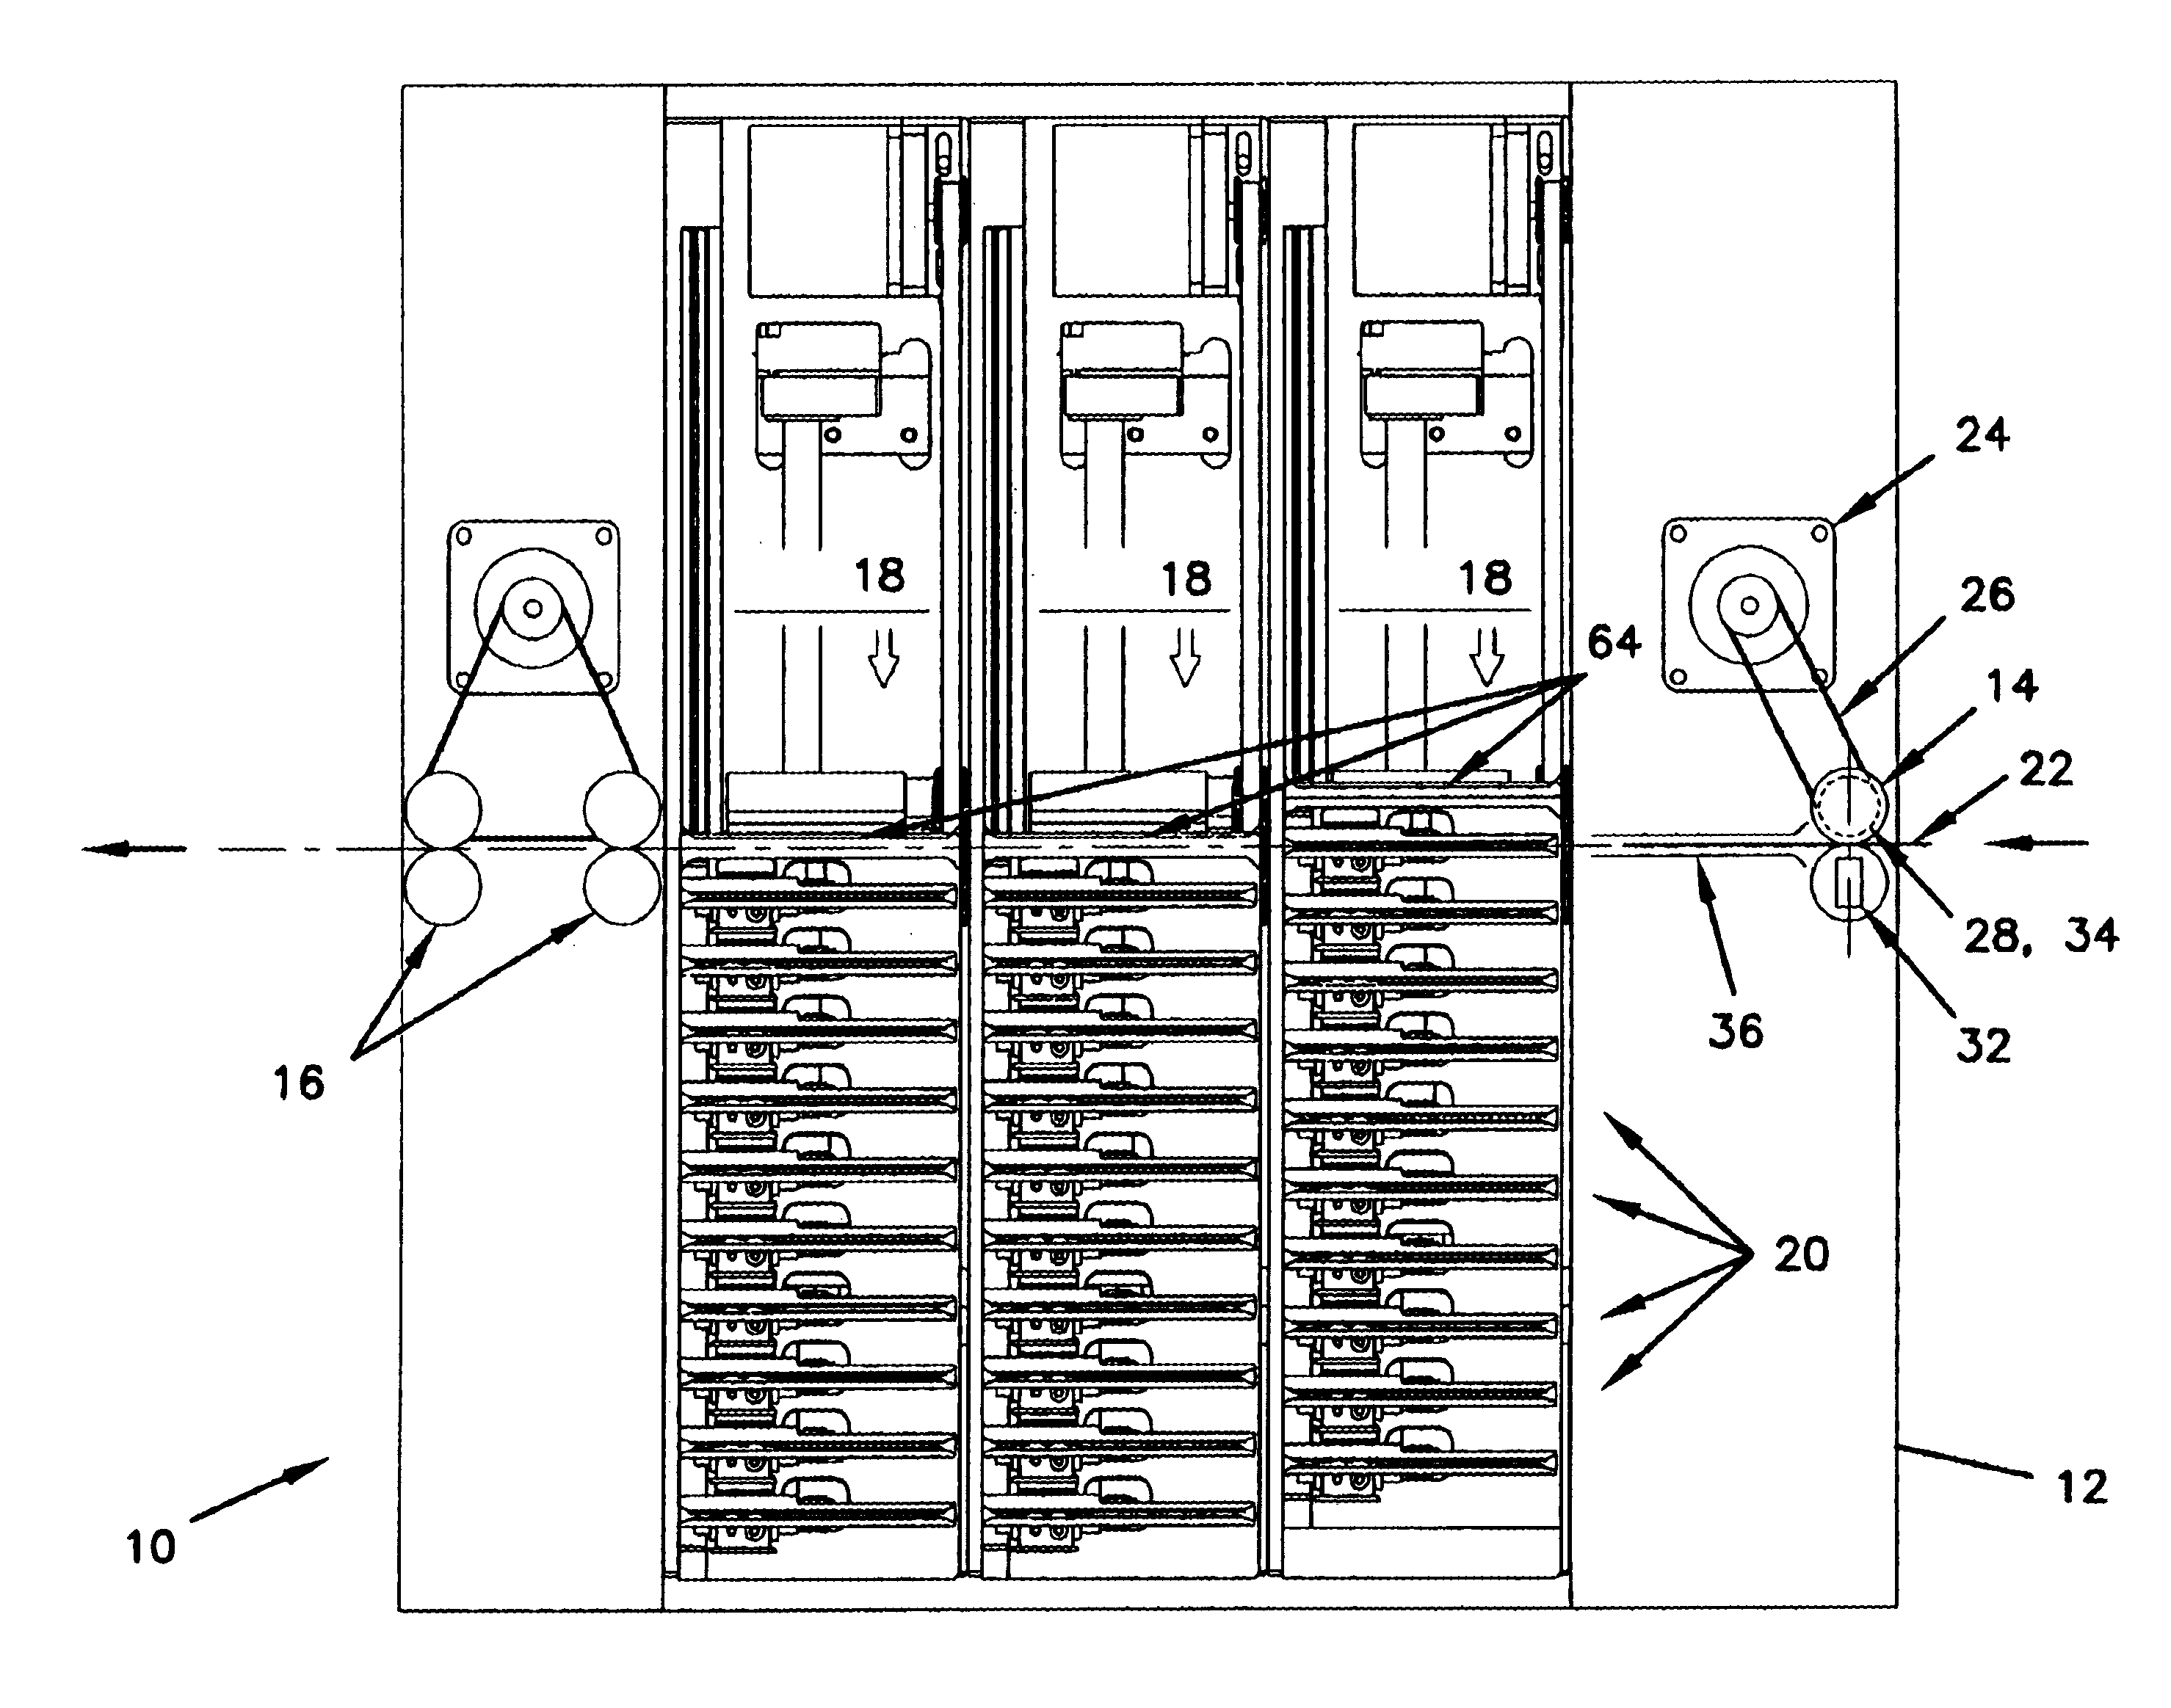 Integrated circuit card programming modules, systems and methods